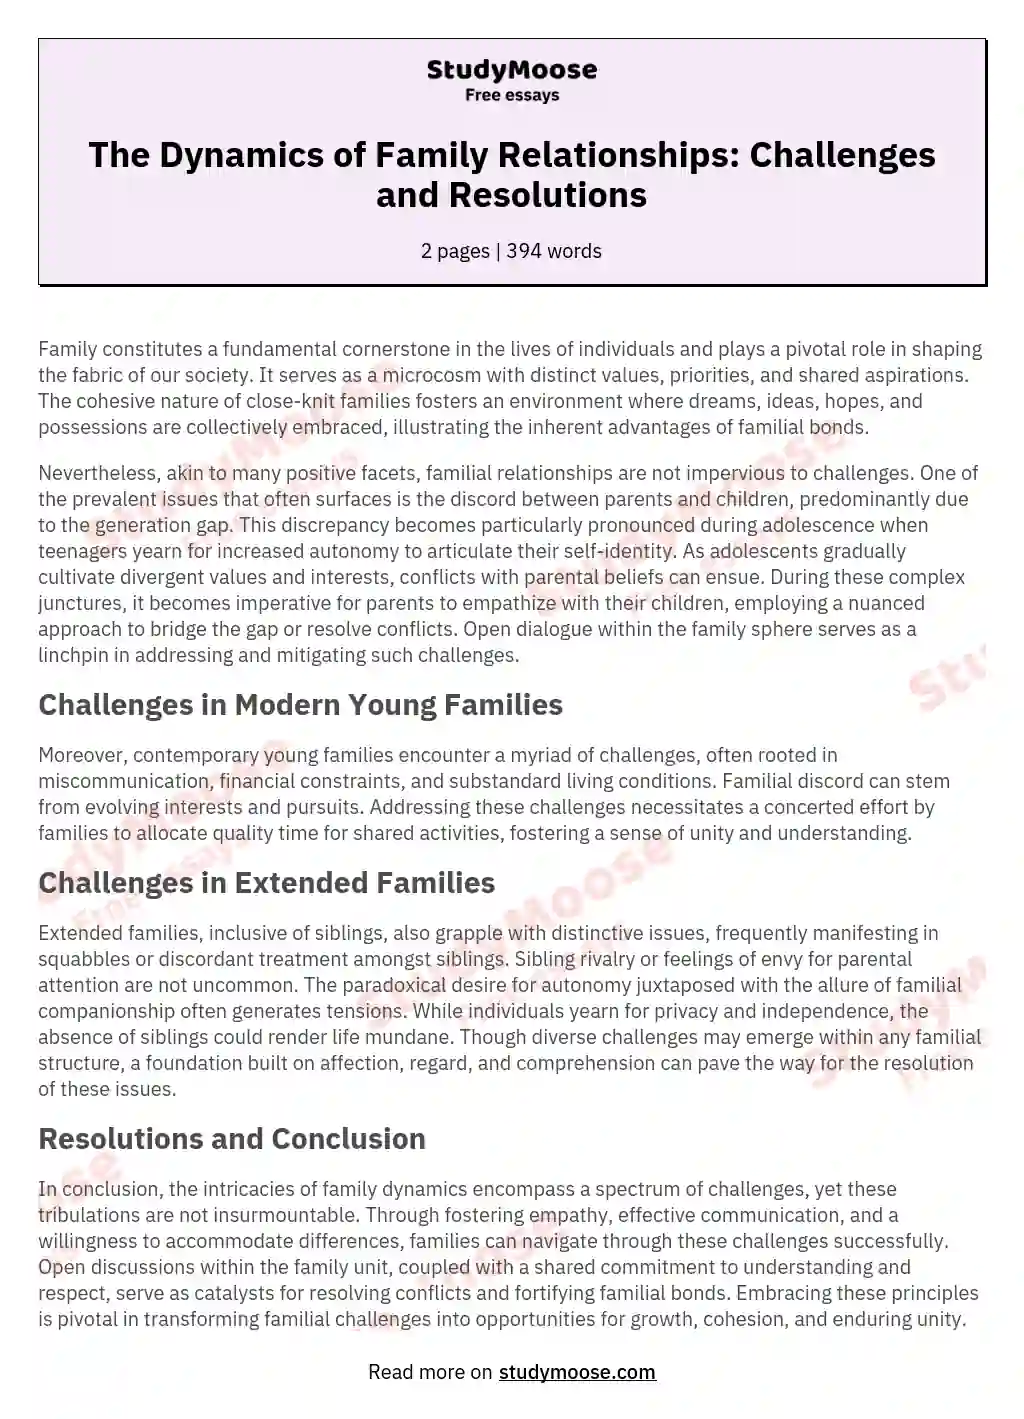 The Dynamics of Family Relationships: Challenges and Resolutions essay